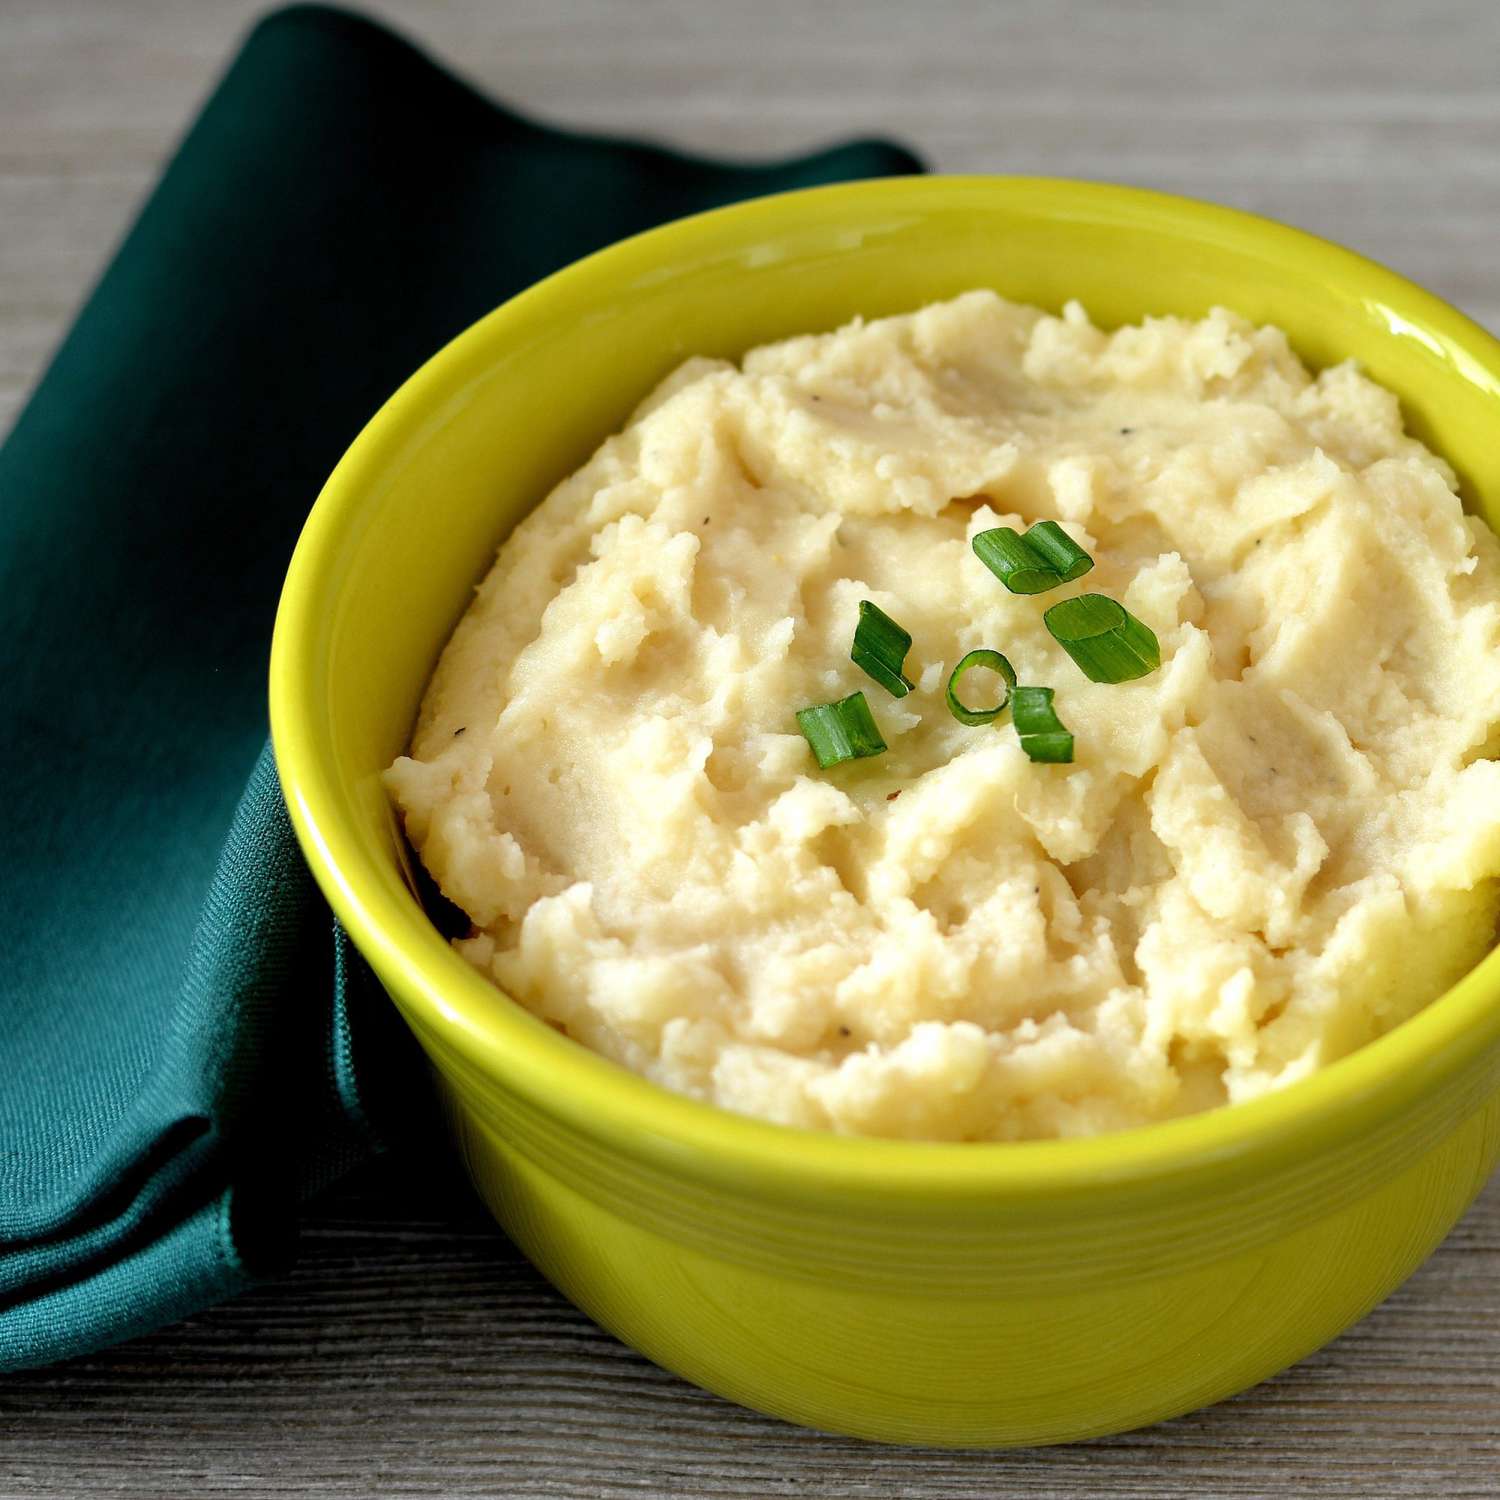 Make-Ahead Mashed Potatoes in a lime-green dish